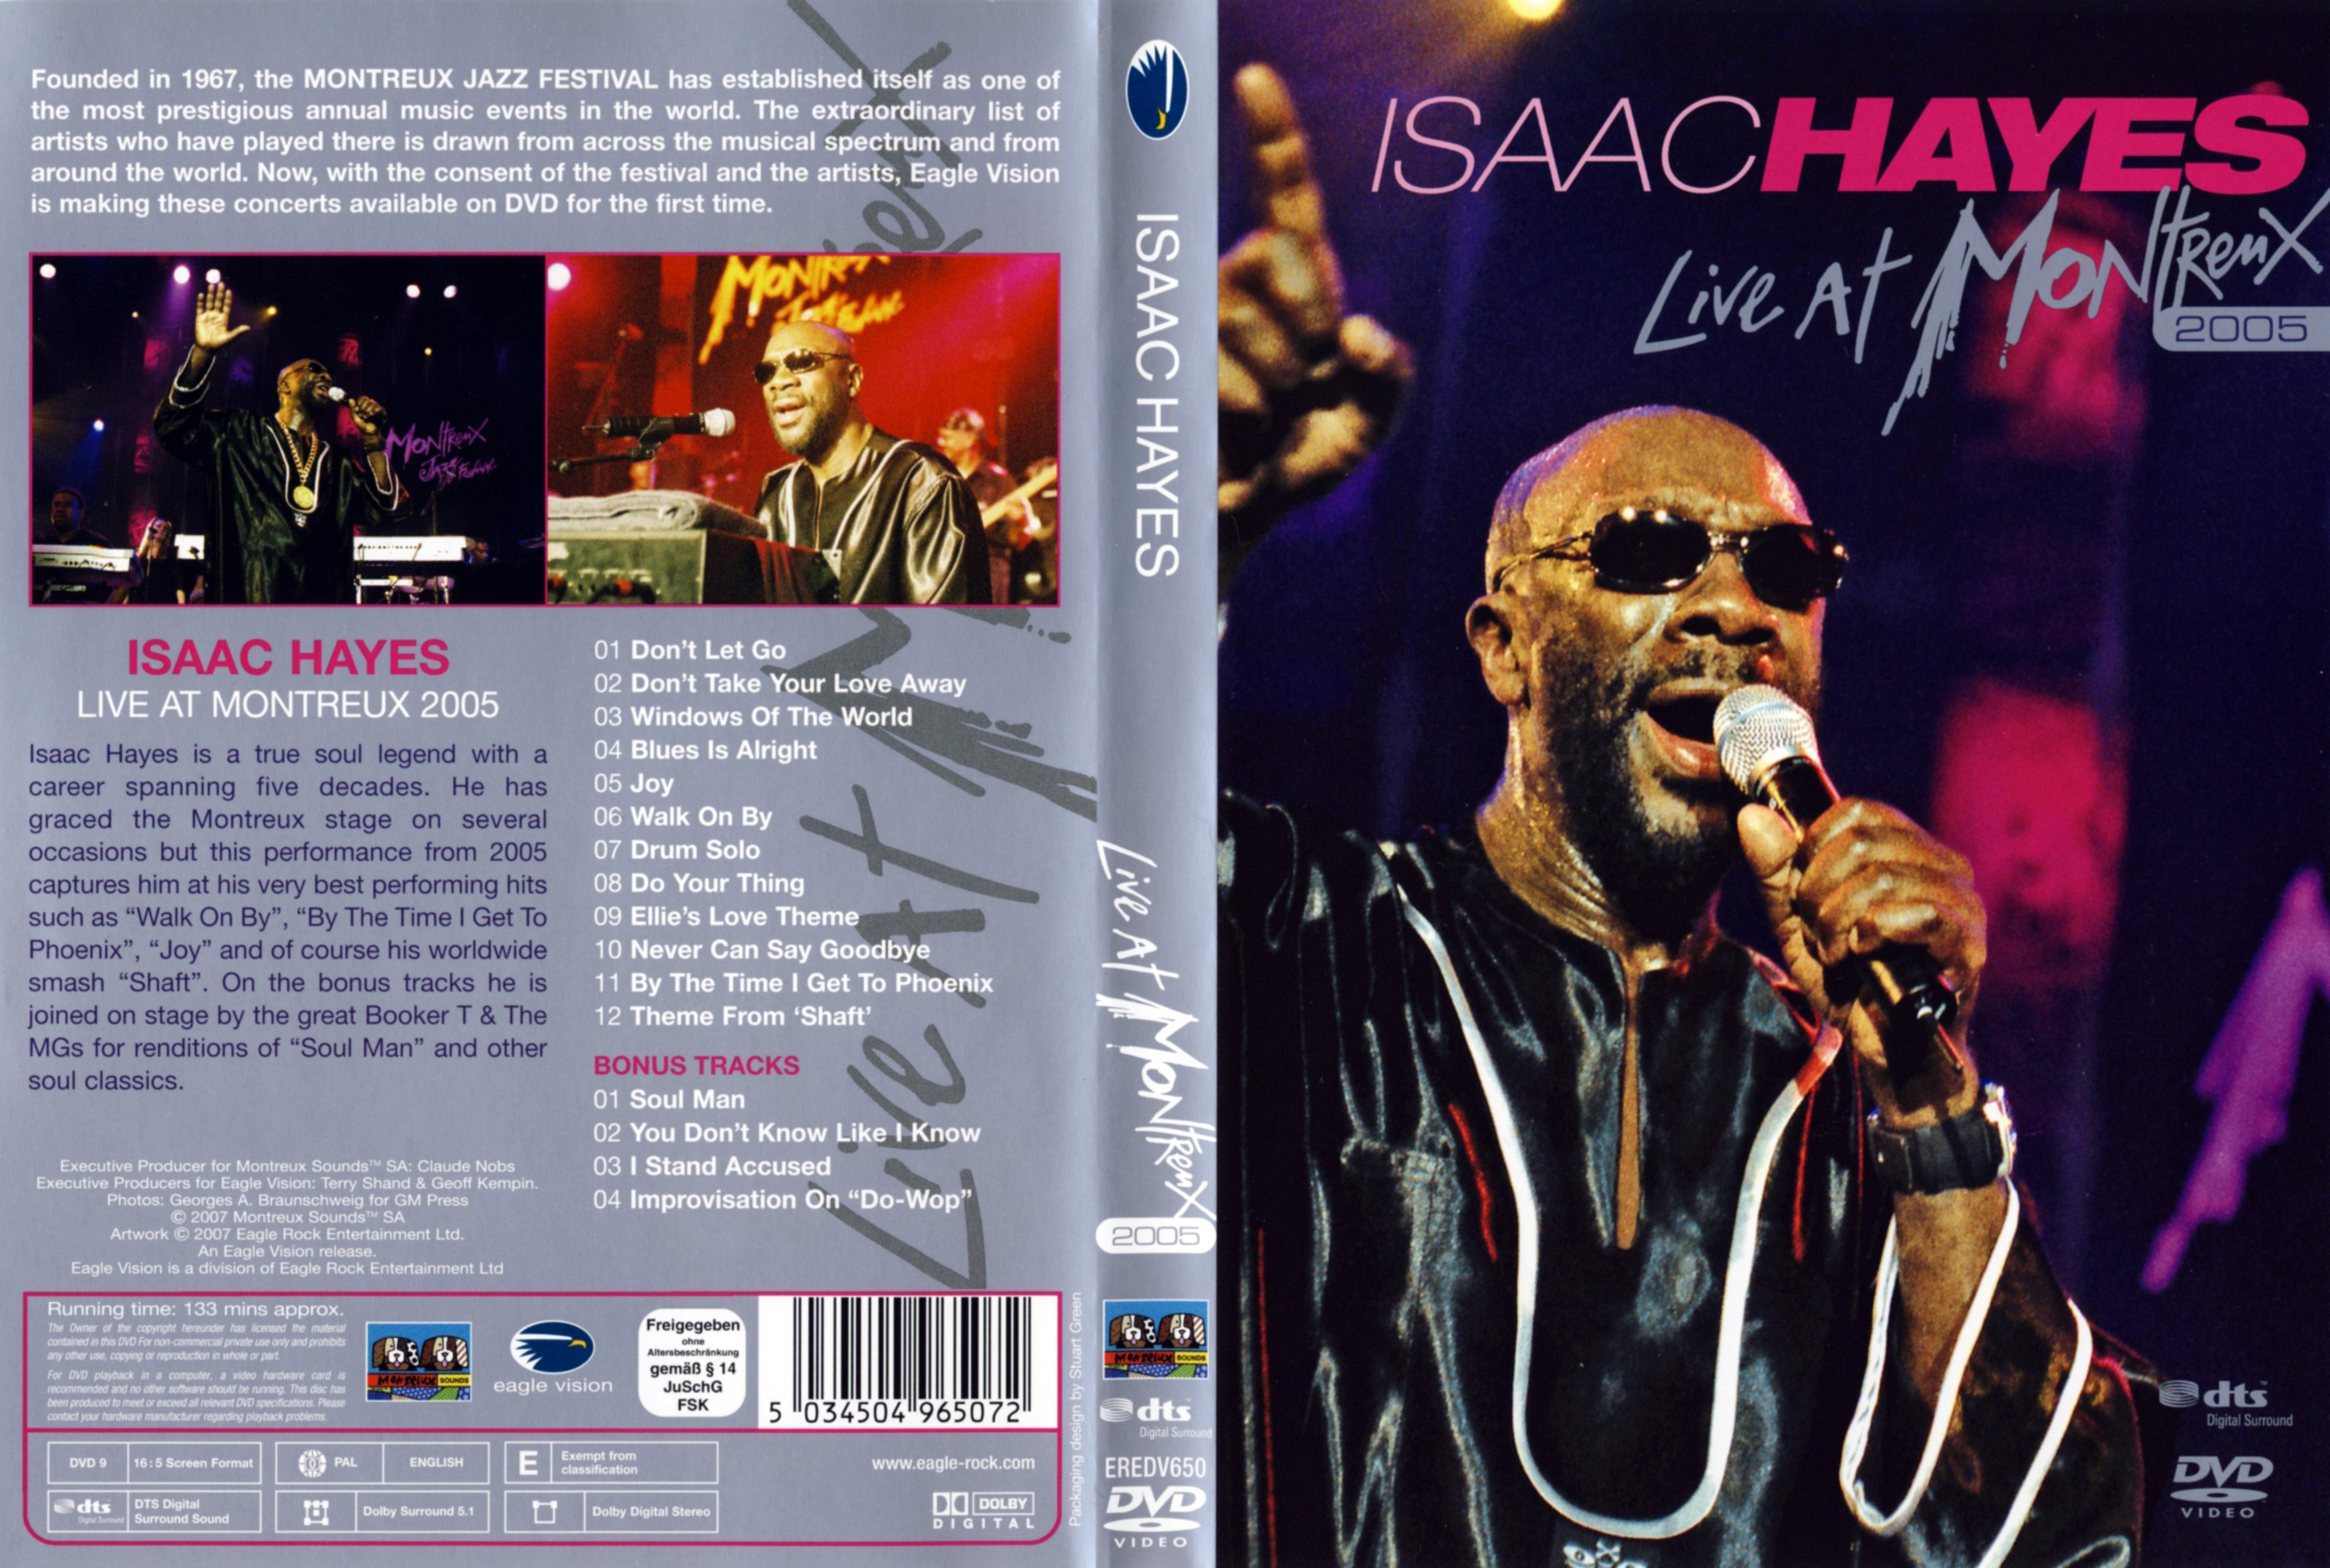 Jaquette DVD Isaac Hayes Live at Montreux 2005